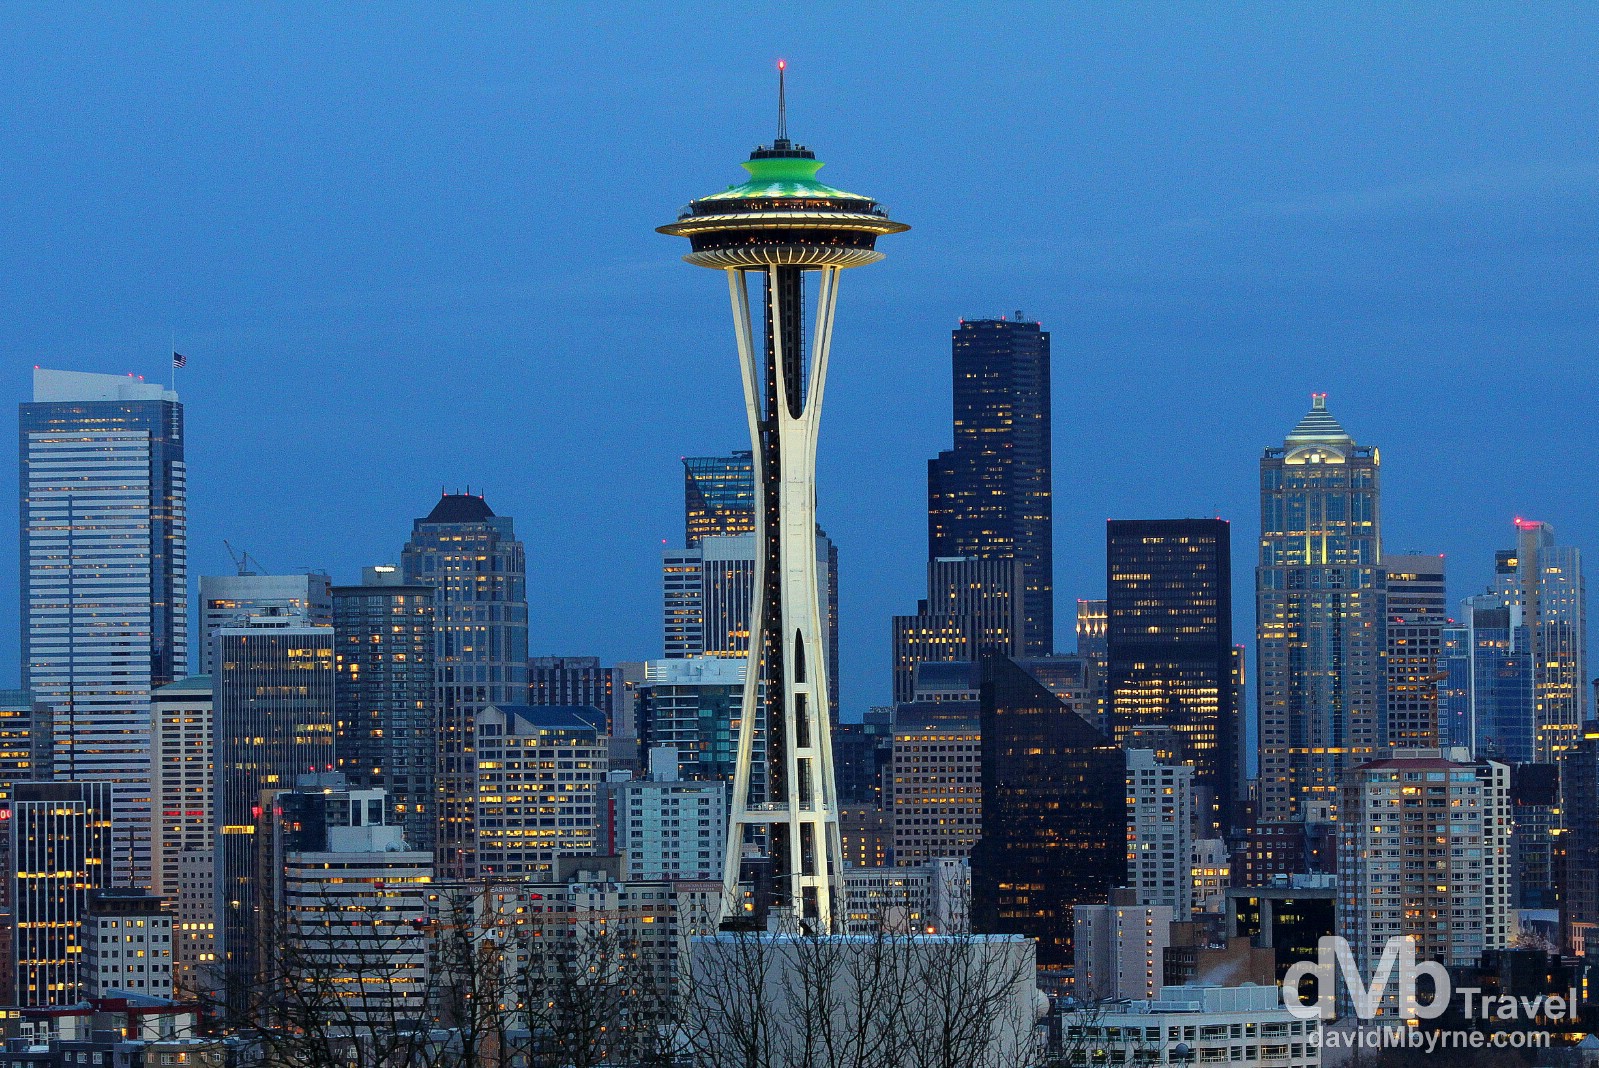 The Seattle city skyline at dusk from Kelly Park, Seattle, Washington, USA. March 26th 2013. 